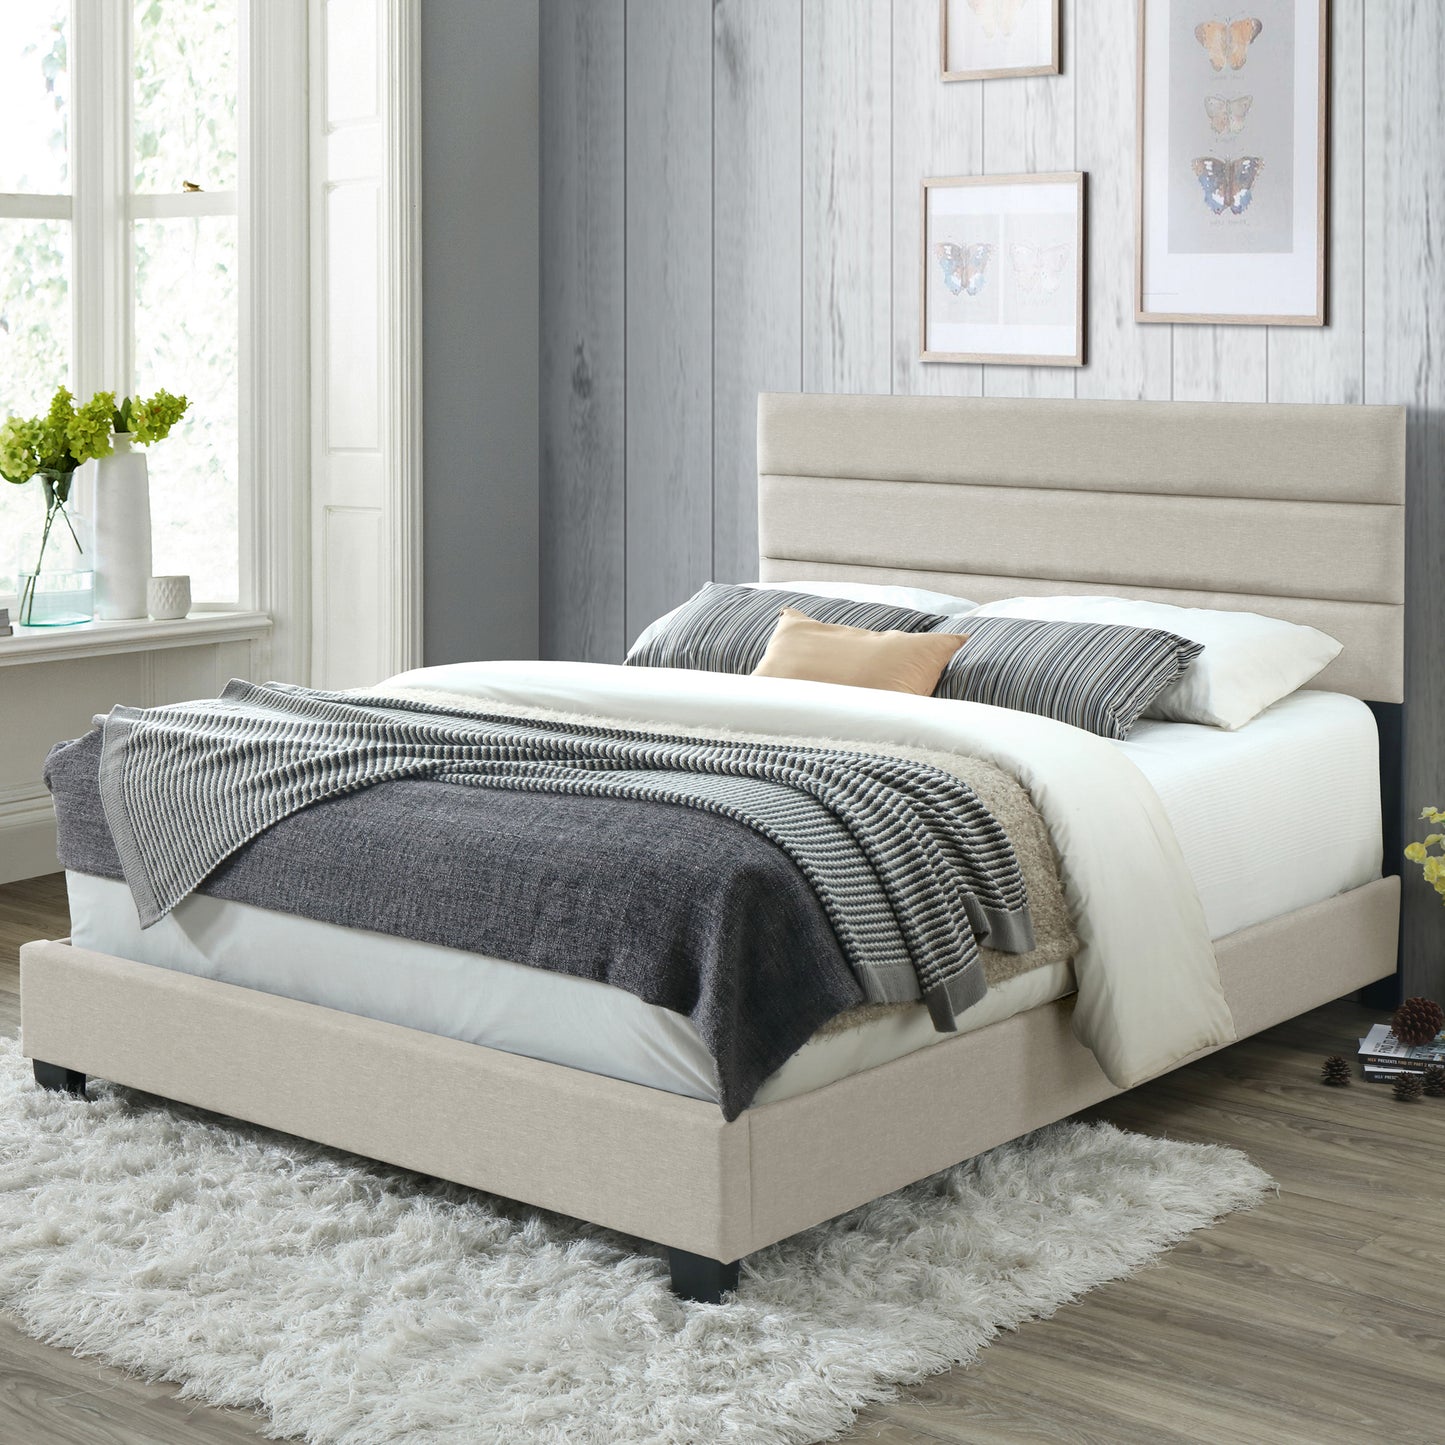 Aris Beige Fabric Twin Bed with Line Stitching Tufting